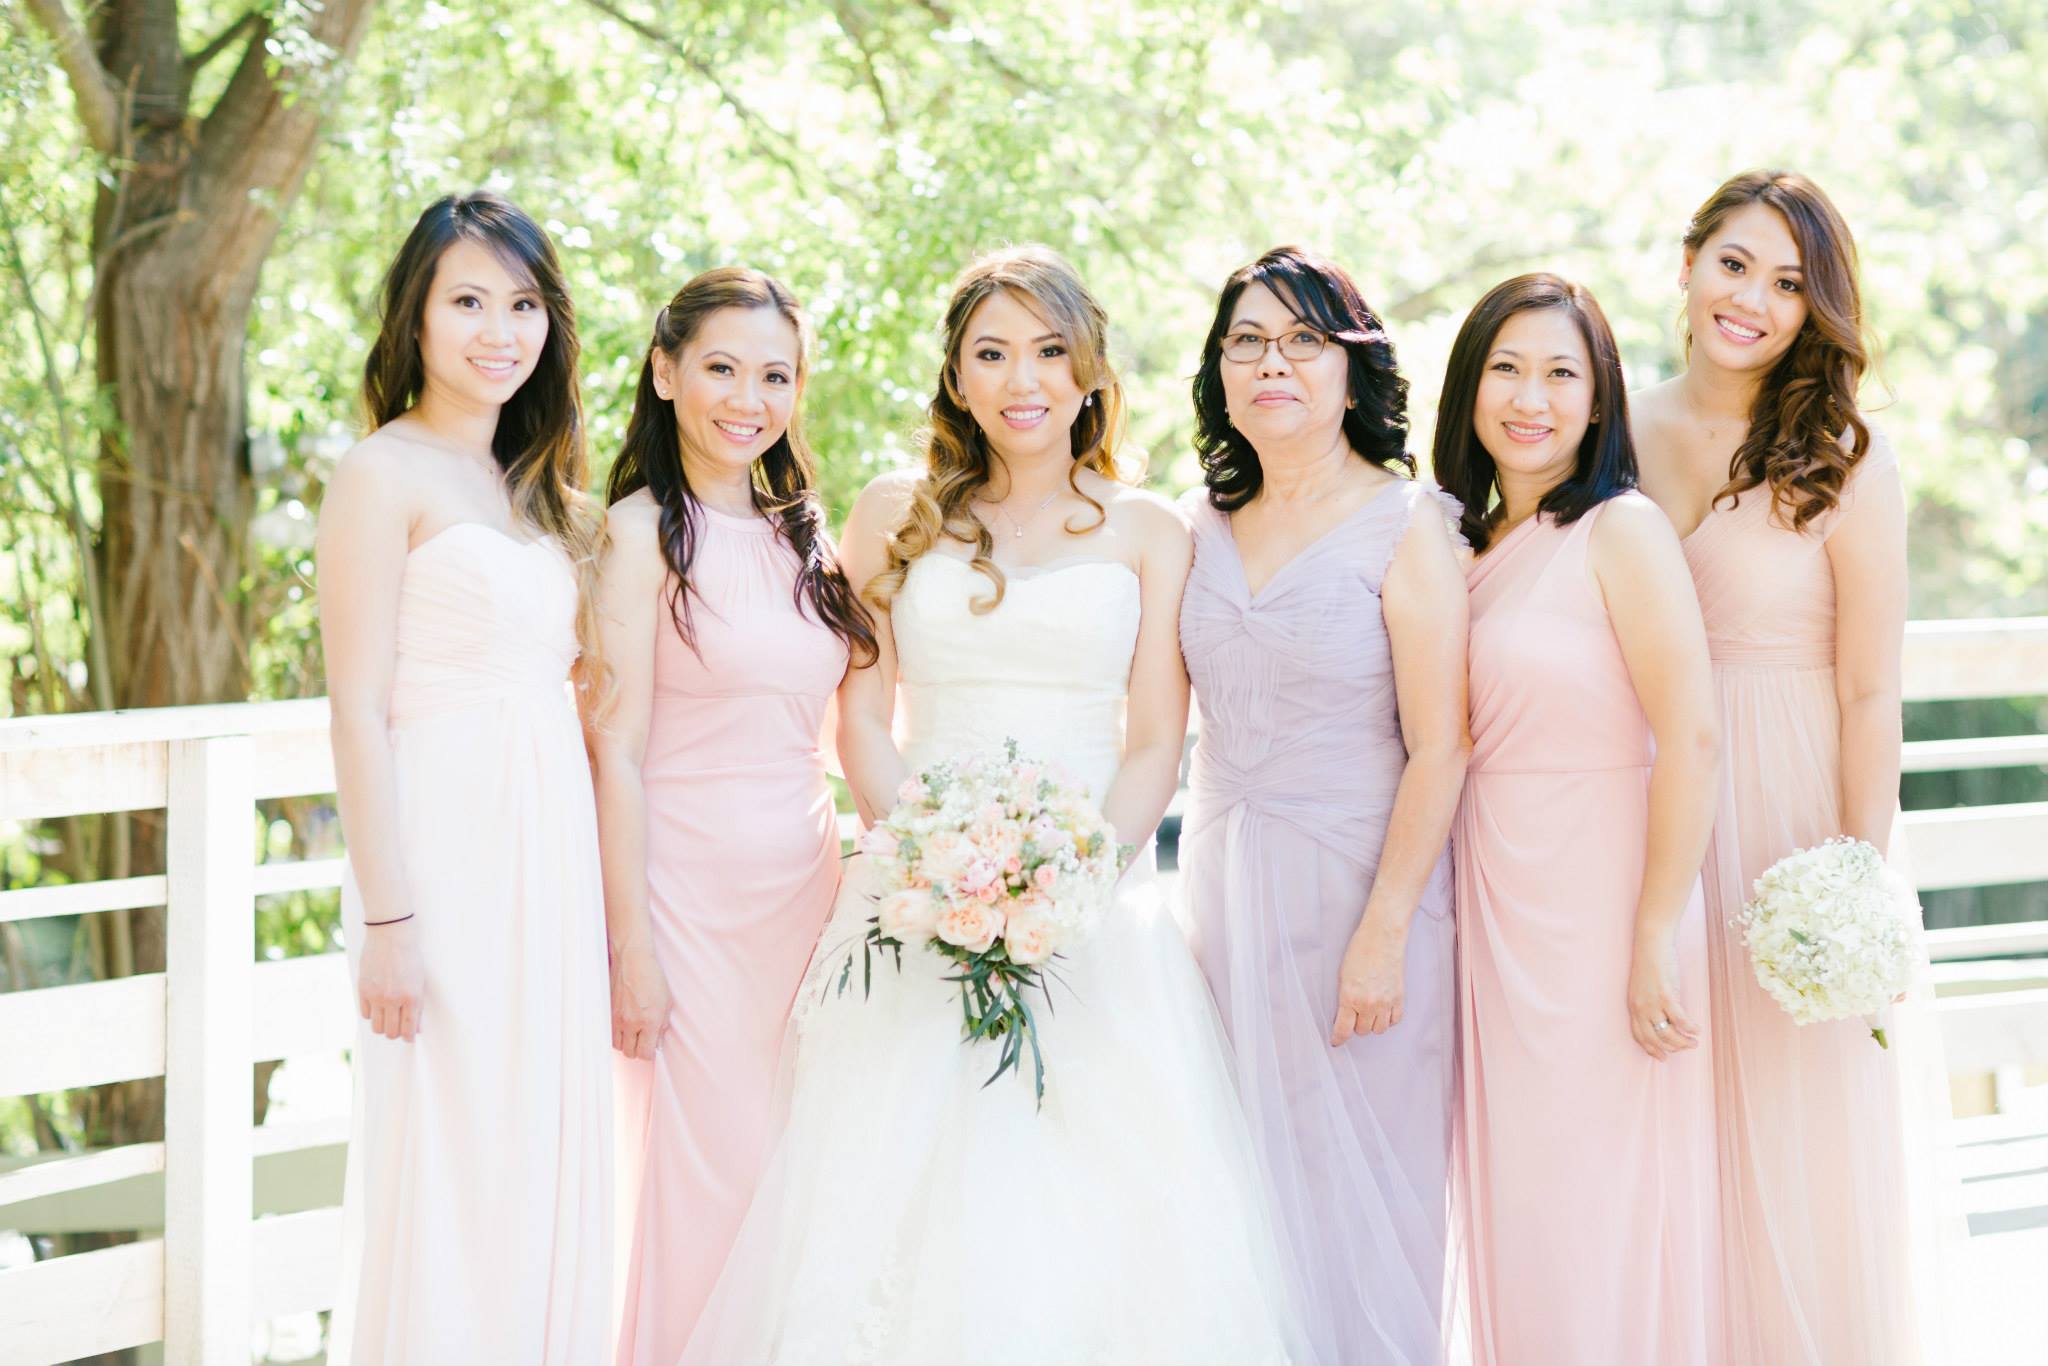 Rustic and elegant wedding at Calamigos Ranch in the Redwood room, bride and bridesmaid with mismatched blush dresses